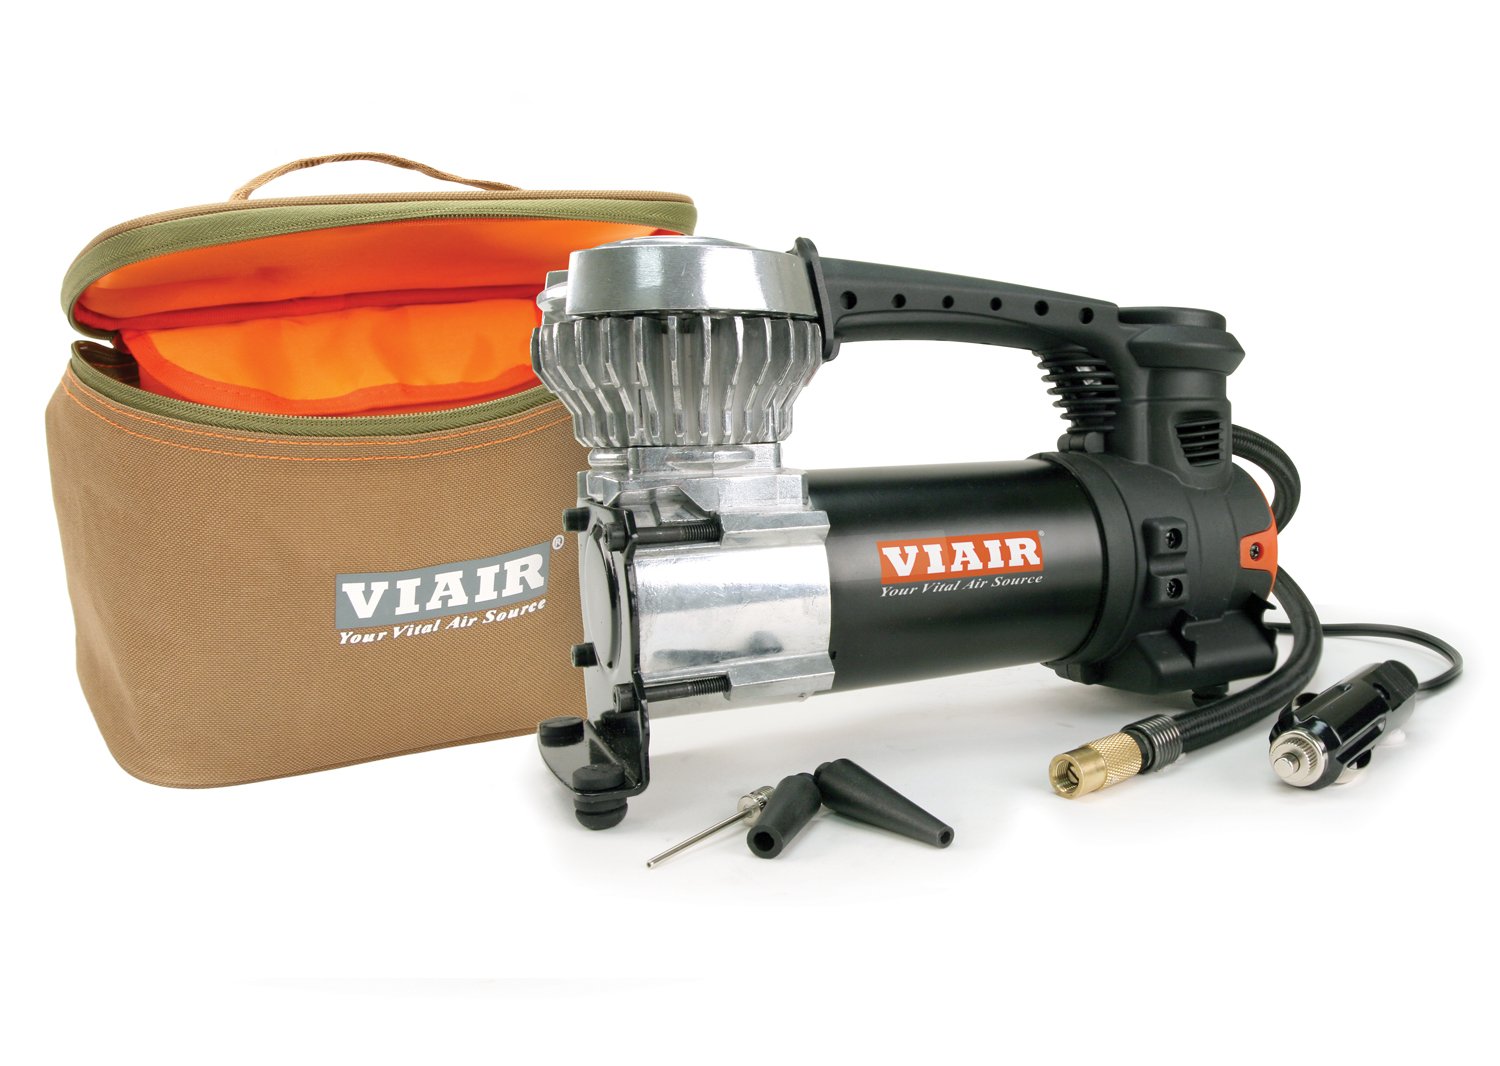 VIAIR 85P - 00085 Tire Inflator Portable Air Compressor for Car, Truck & SUV 12V $59.5 at Amazon